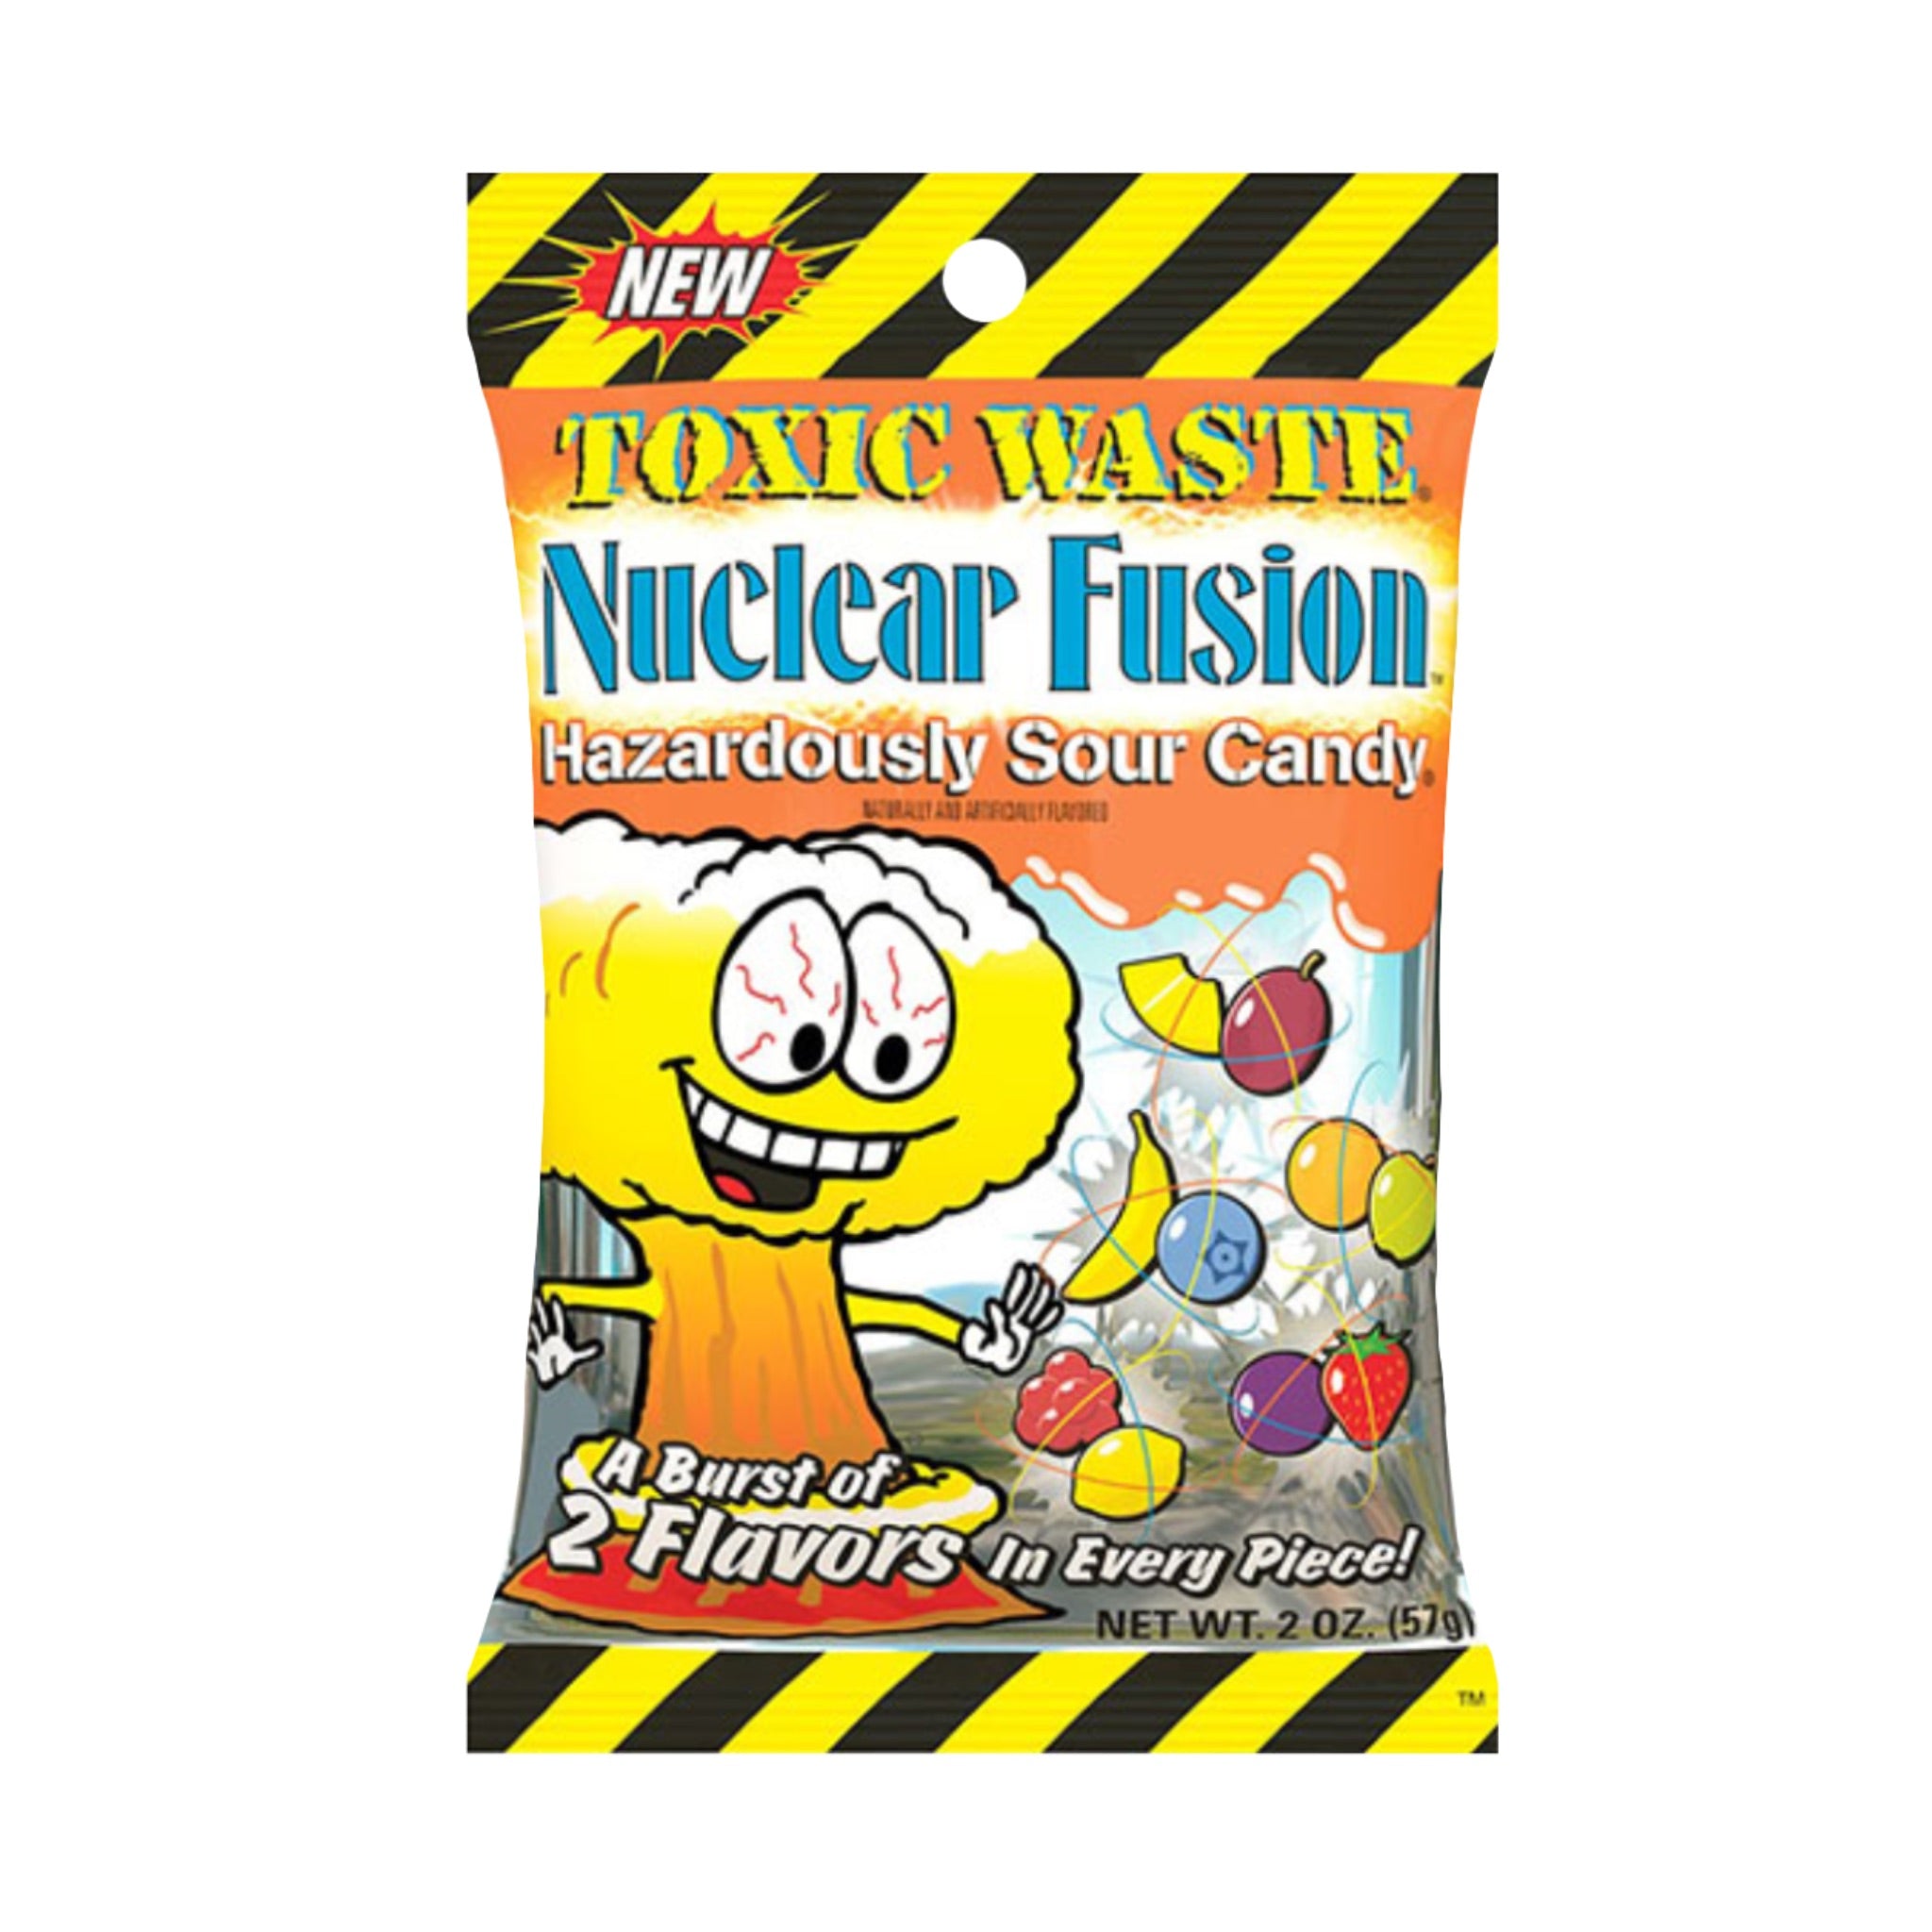 Toxic Waste nuclear fusion